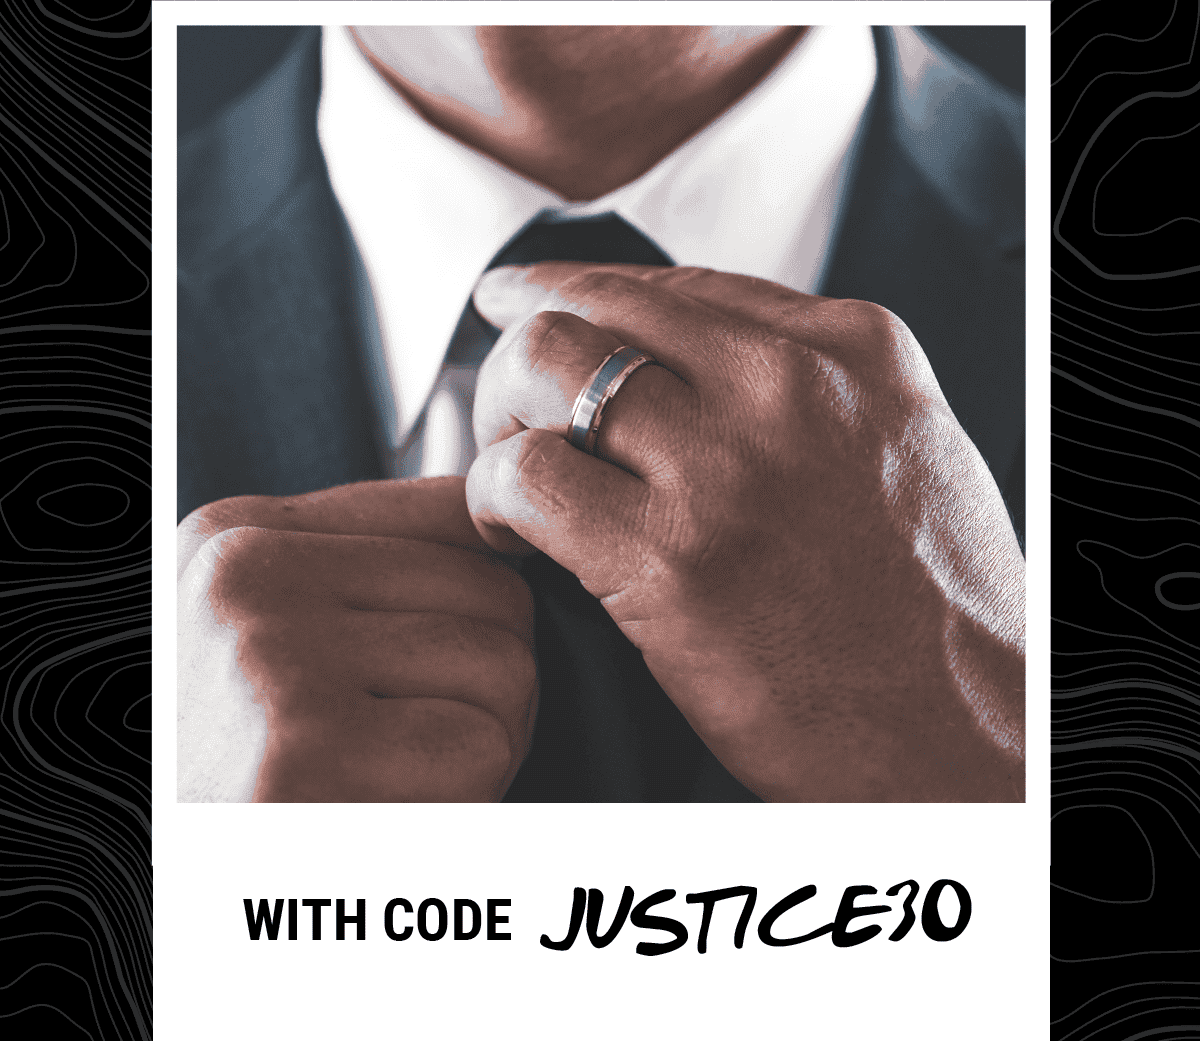 Up to 30% Off Select Bands with Code JUSTICE30